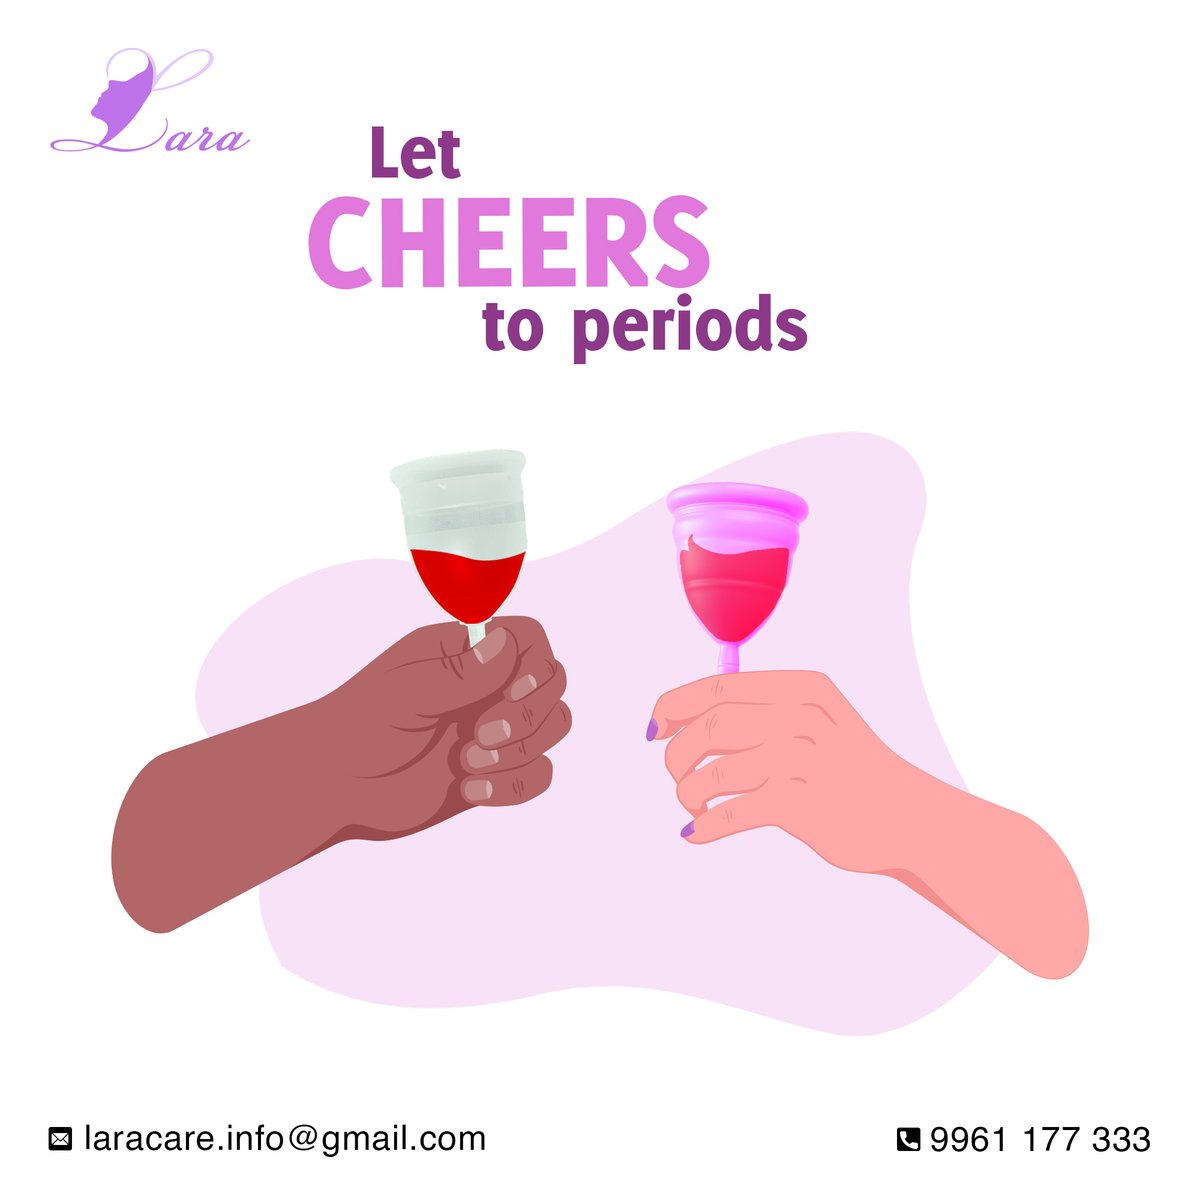 Let cheers to your periods with Lara menstrual cup; the ultimate solution for your menstrual cycle..
#LaraMenstrualCup #PeriodRevolution #EmbraceTheChange #ComfortAndFreedom #SustainablePeriods #WomenEmpowerment #EarlyBirdOffer #LimitedTimeDiscount #SayNoToLeaks #Experience